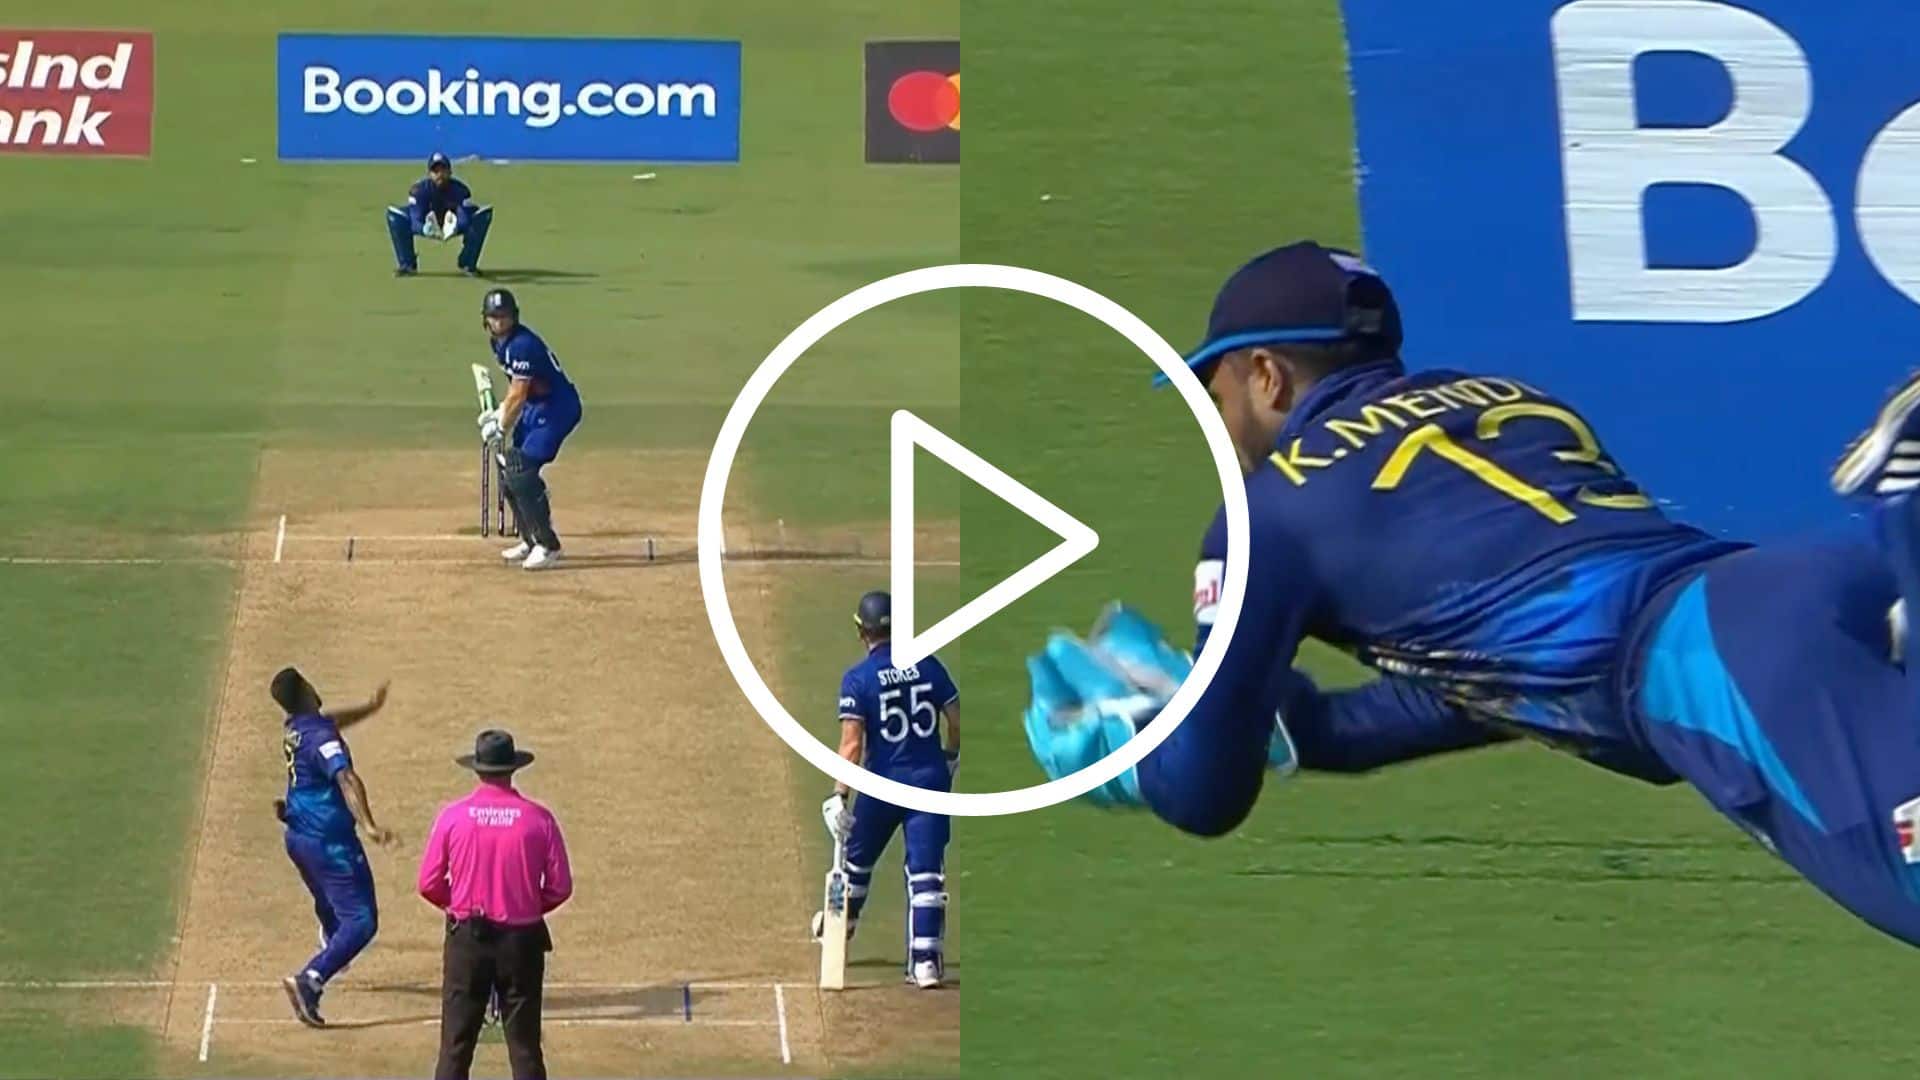 [Watch] Jos Buttler’s World Cup Misery Continues As Mendis Takes ‘Jaw-Dropping’ Catch